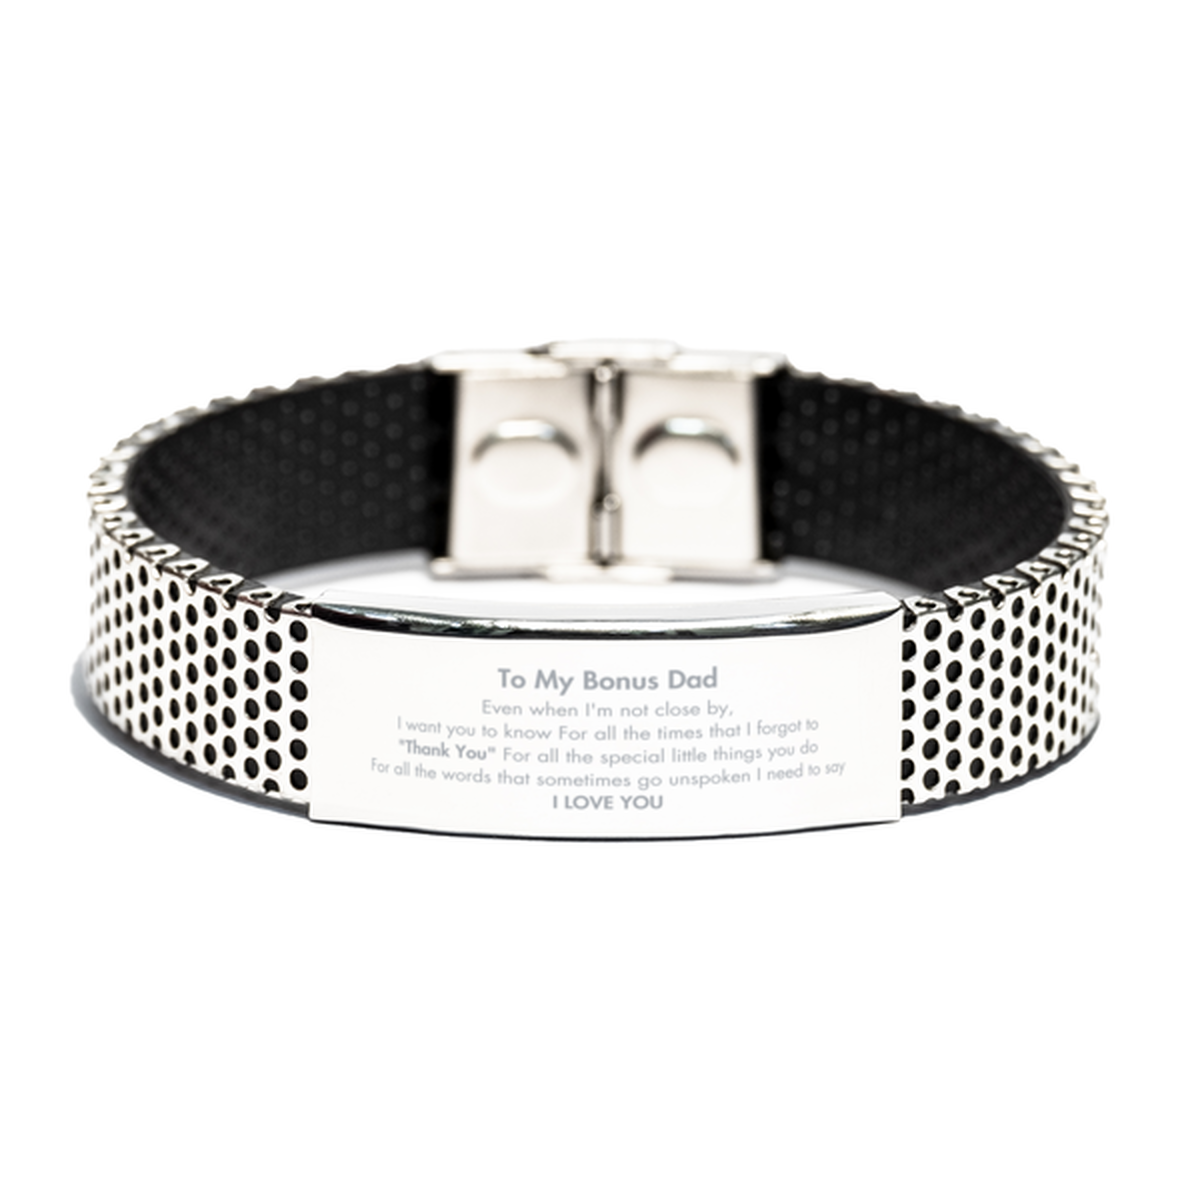 Thank You Gifts for Bonus Dad, Keepsake Stainless Steel Bracelet Gifts for Bonus Dad Birthday Mother's day Father's Day Bonus Dad For all the words That sometimes go unspoken I need to say I LOVE YOU